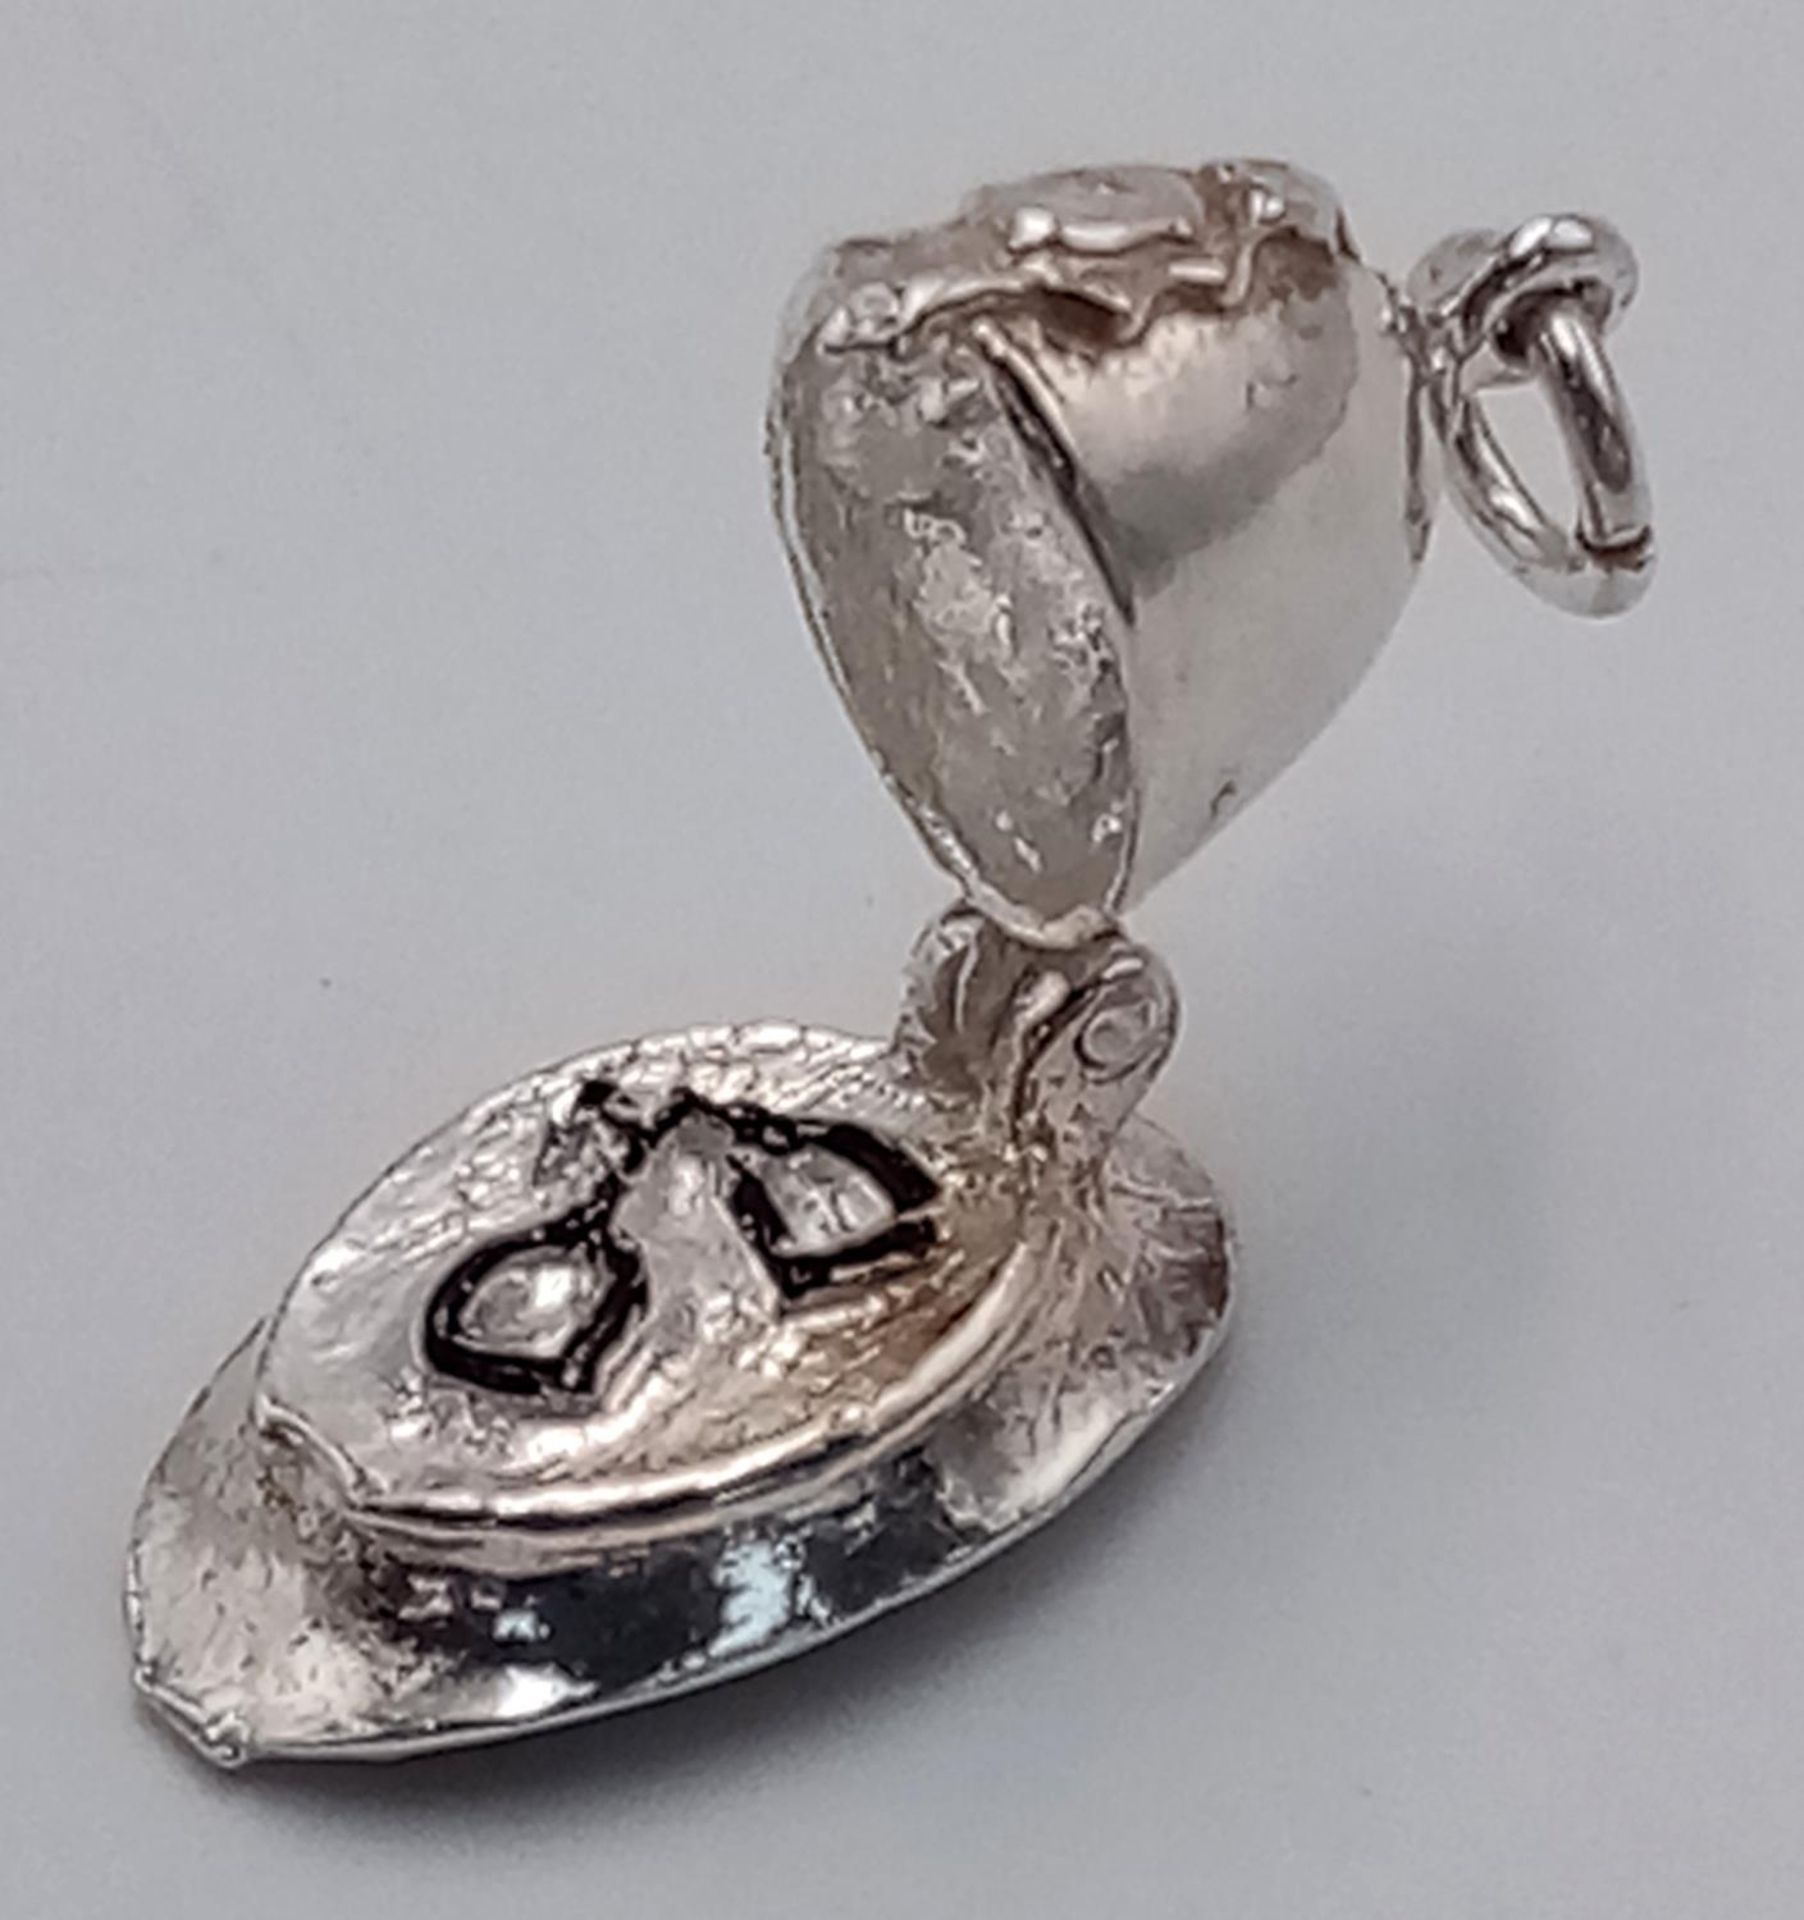 A STERLING SILVER POLICEMANS HAT WHICH OPENS TO REVEAL HANDCUFFS 2.9G , approx 17mm x 16mm. SC 9091 - Bild 3 aus 4